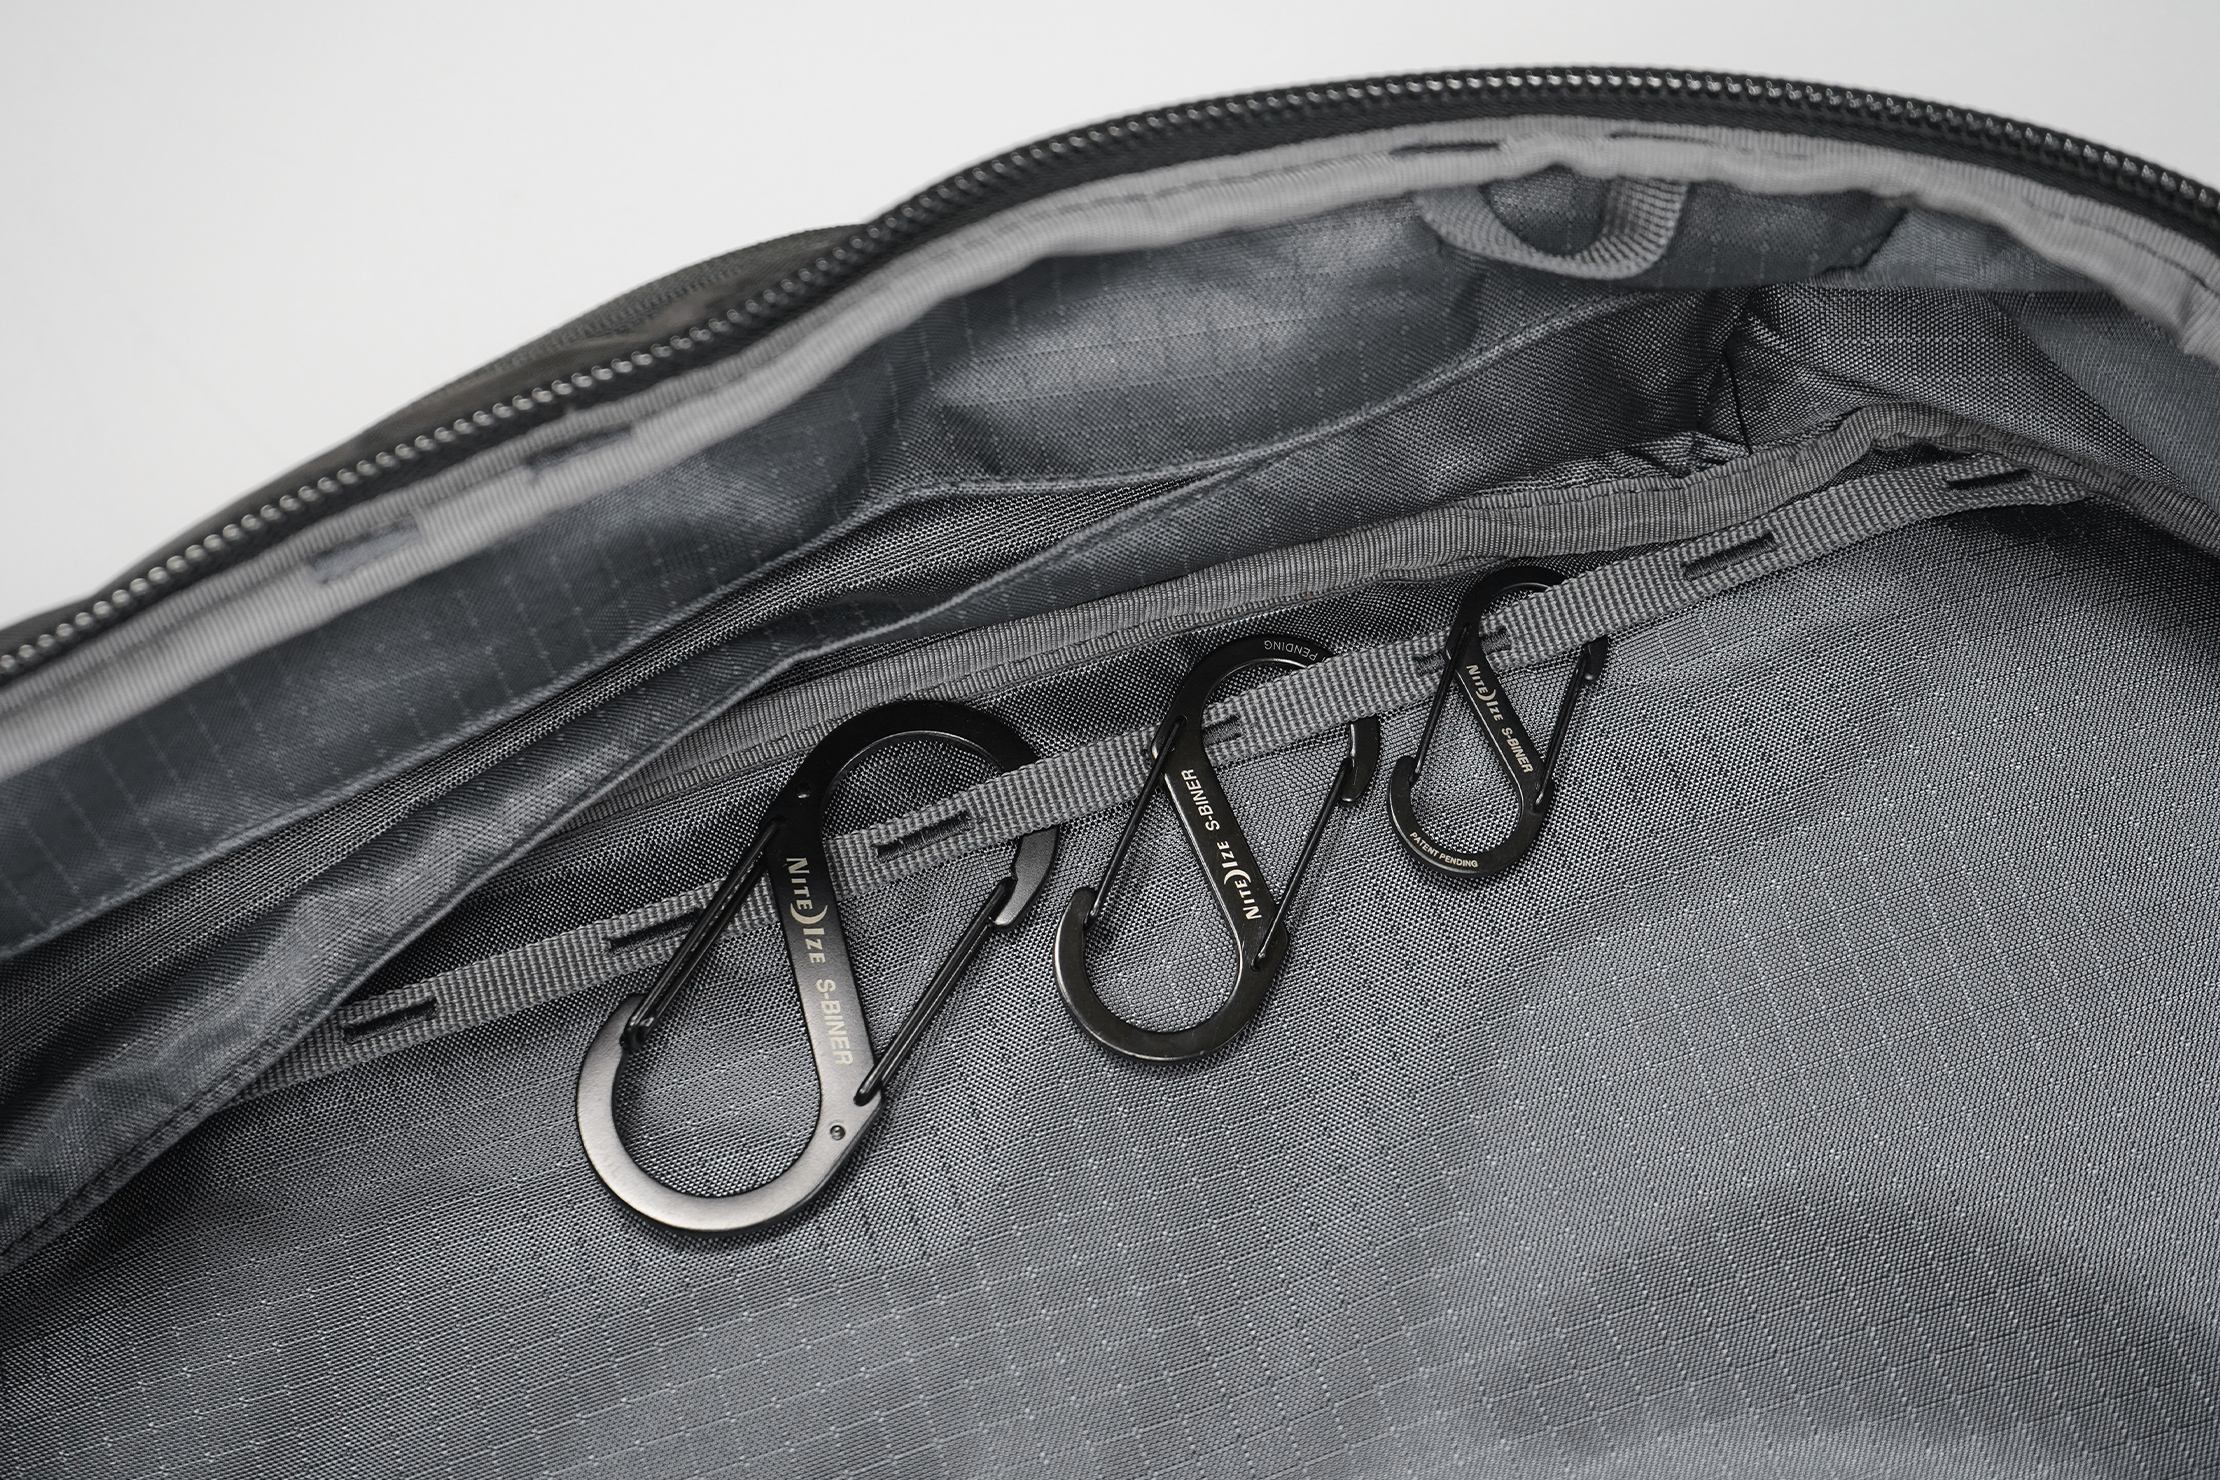 Able Carry Max Backpack | More loops are found inside the main compartment